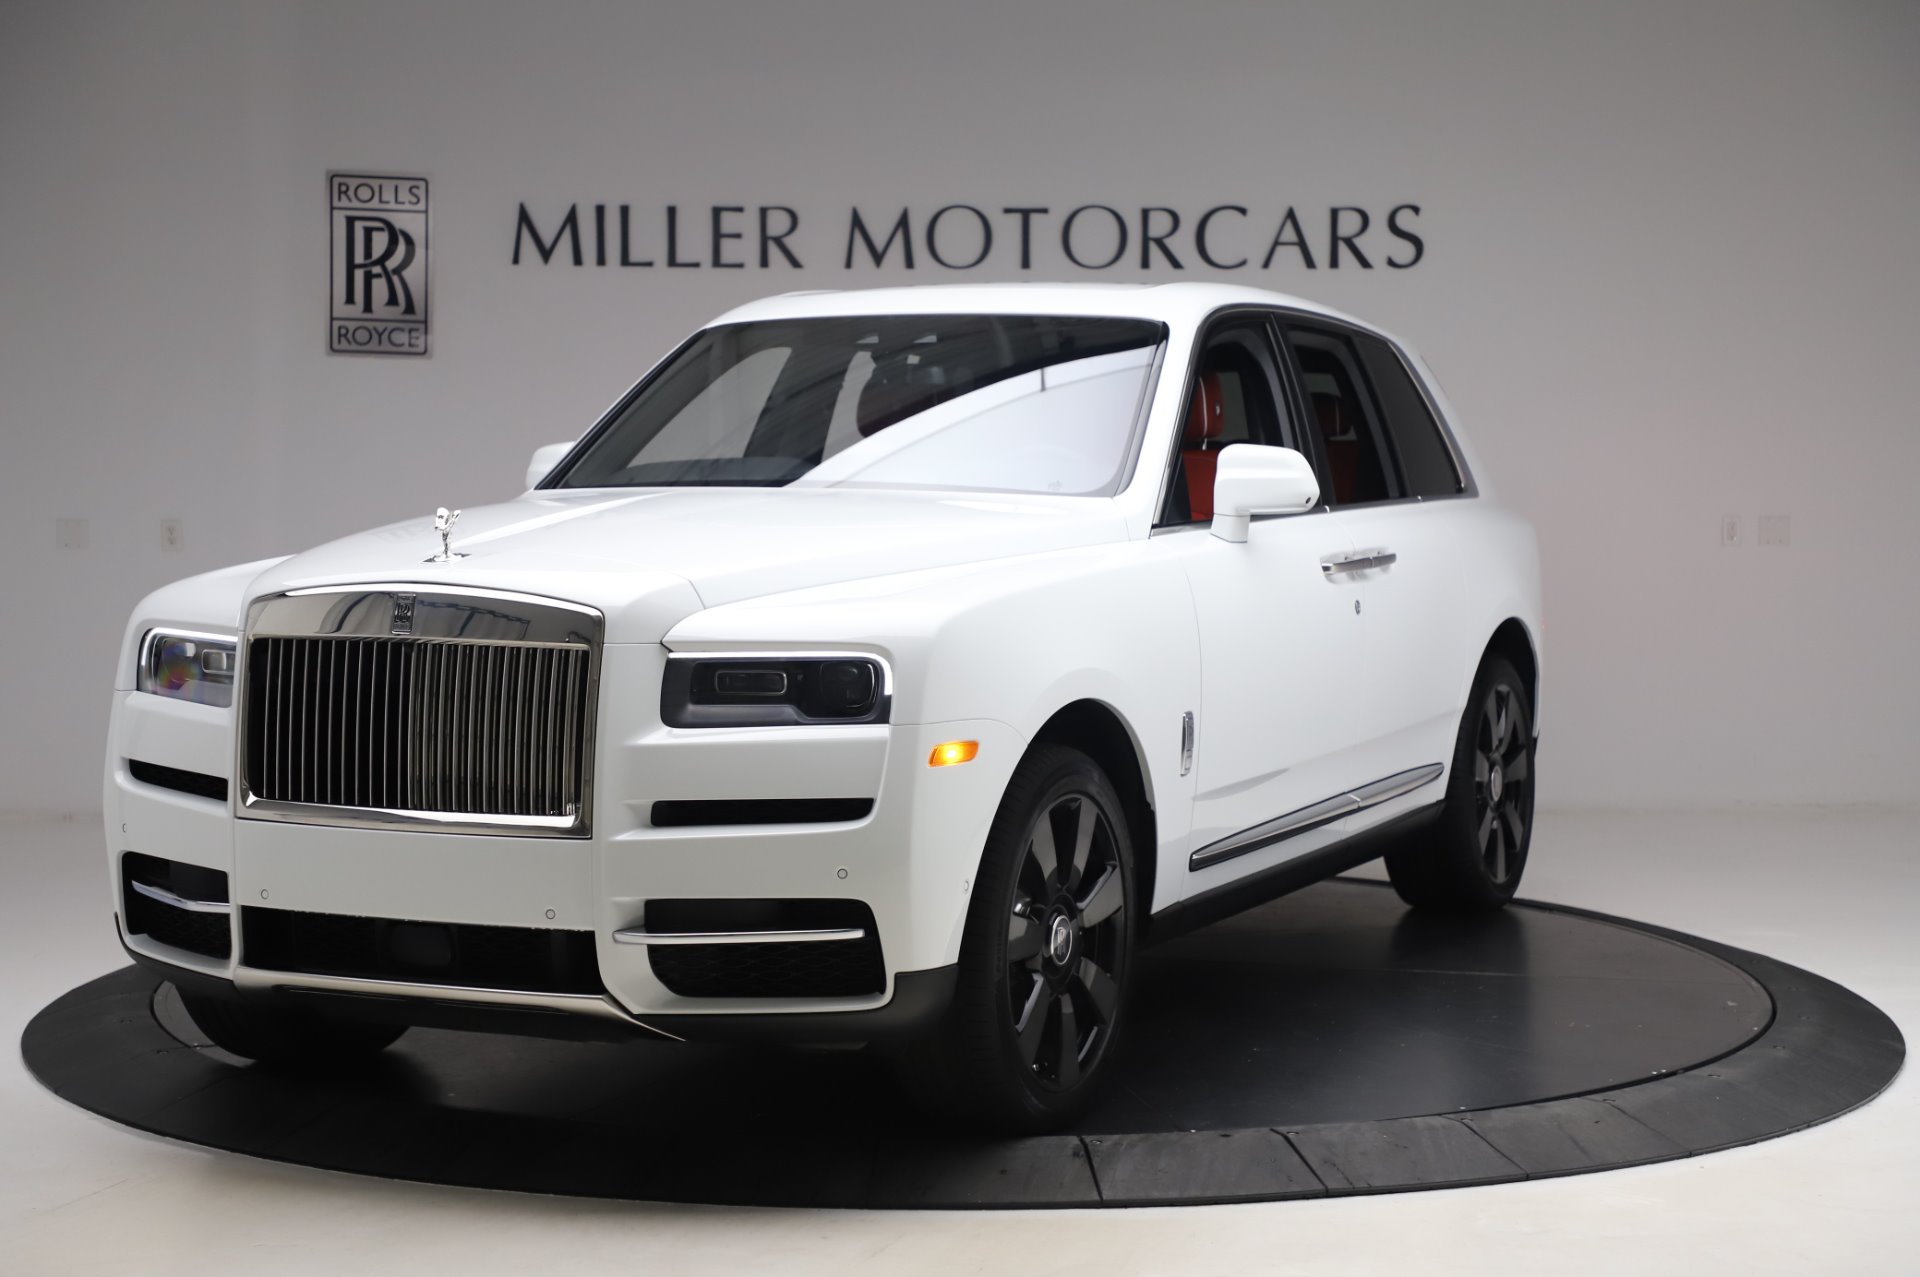 2020 Rolls-Royce Cullinan Prices, Reviews, and Photos - MotorTrend